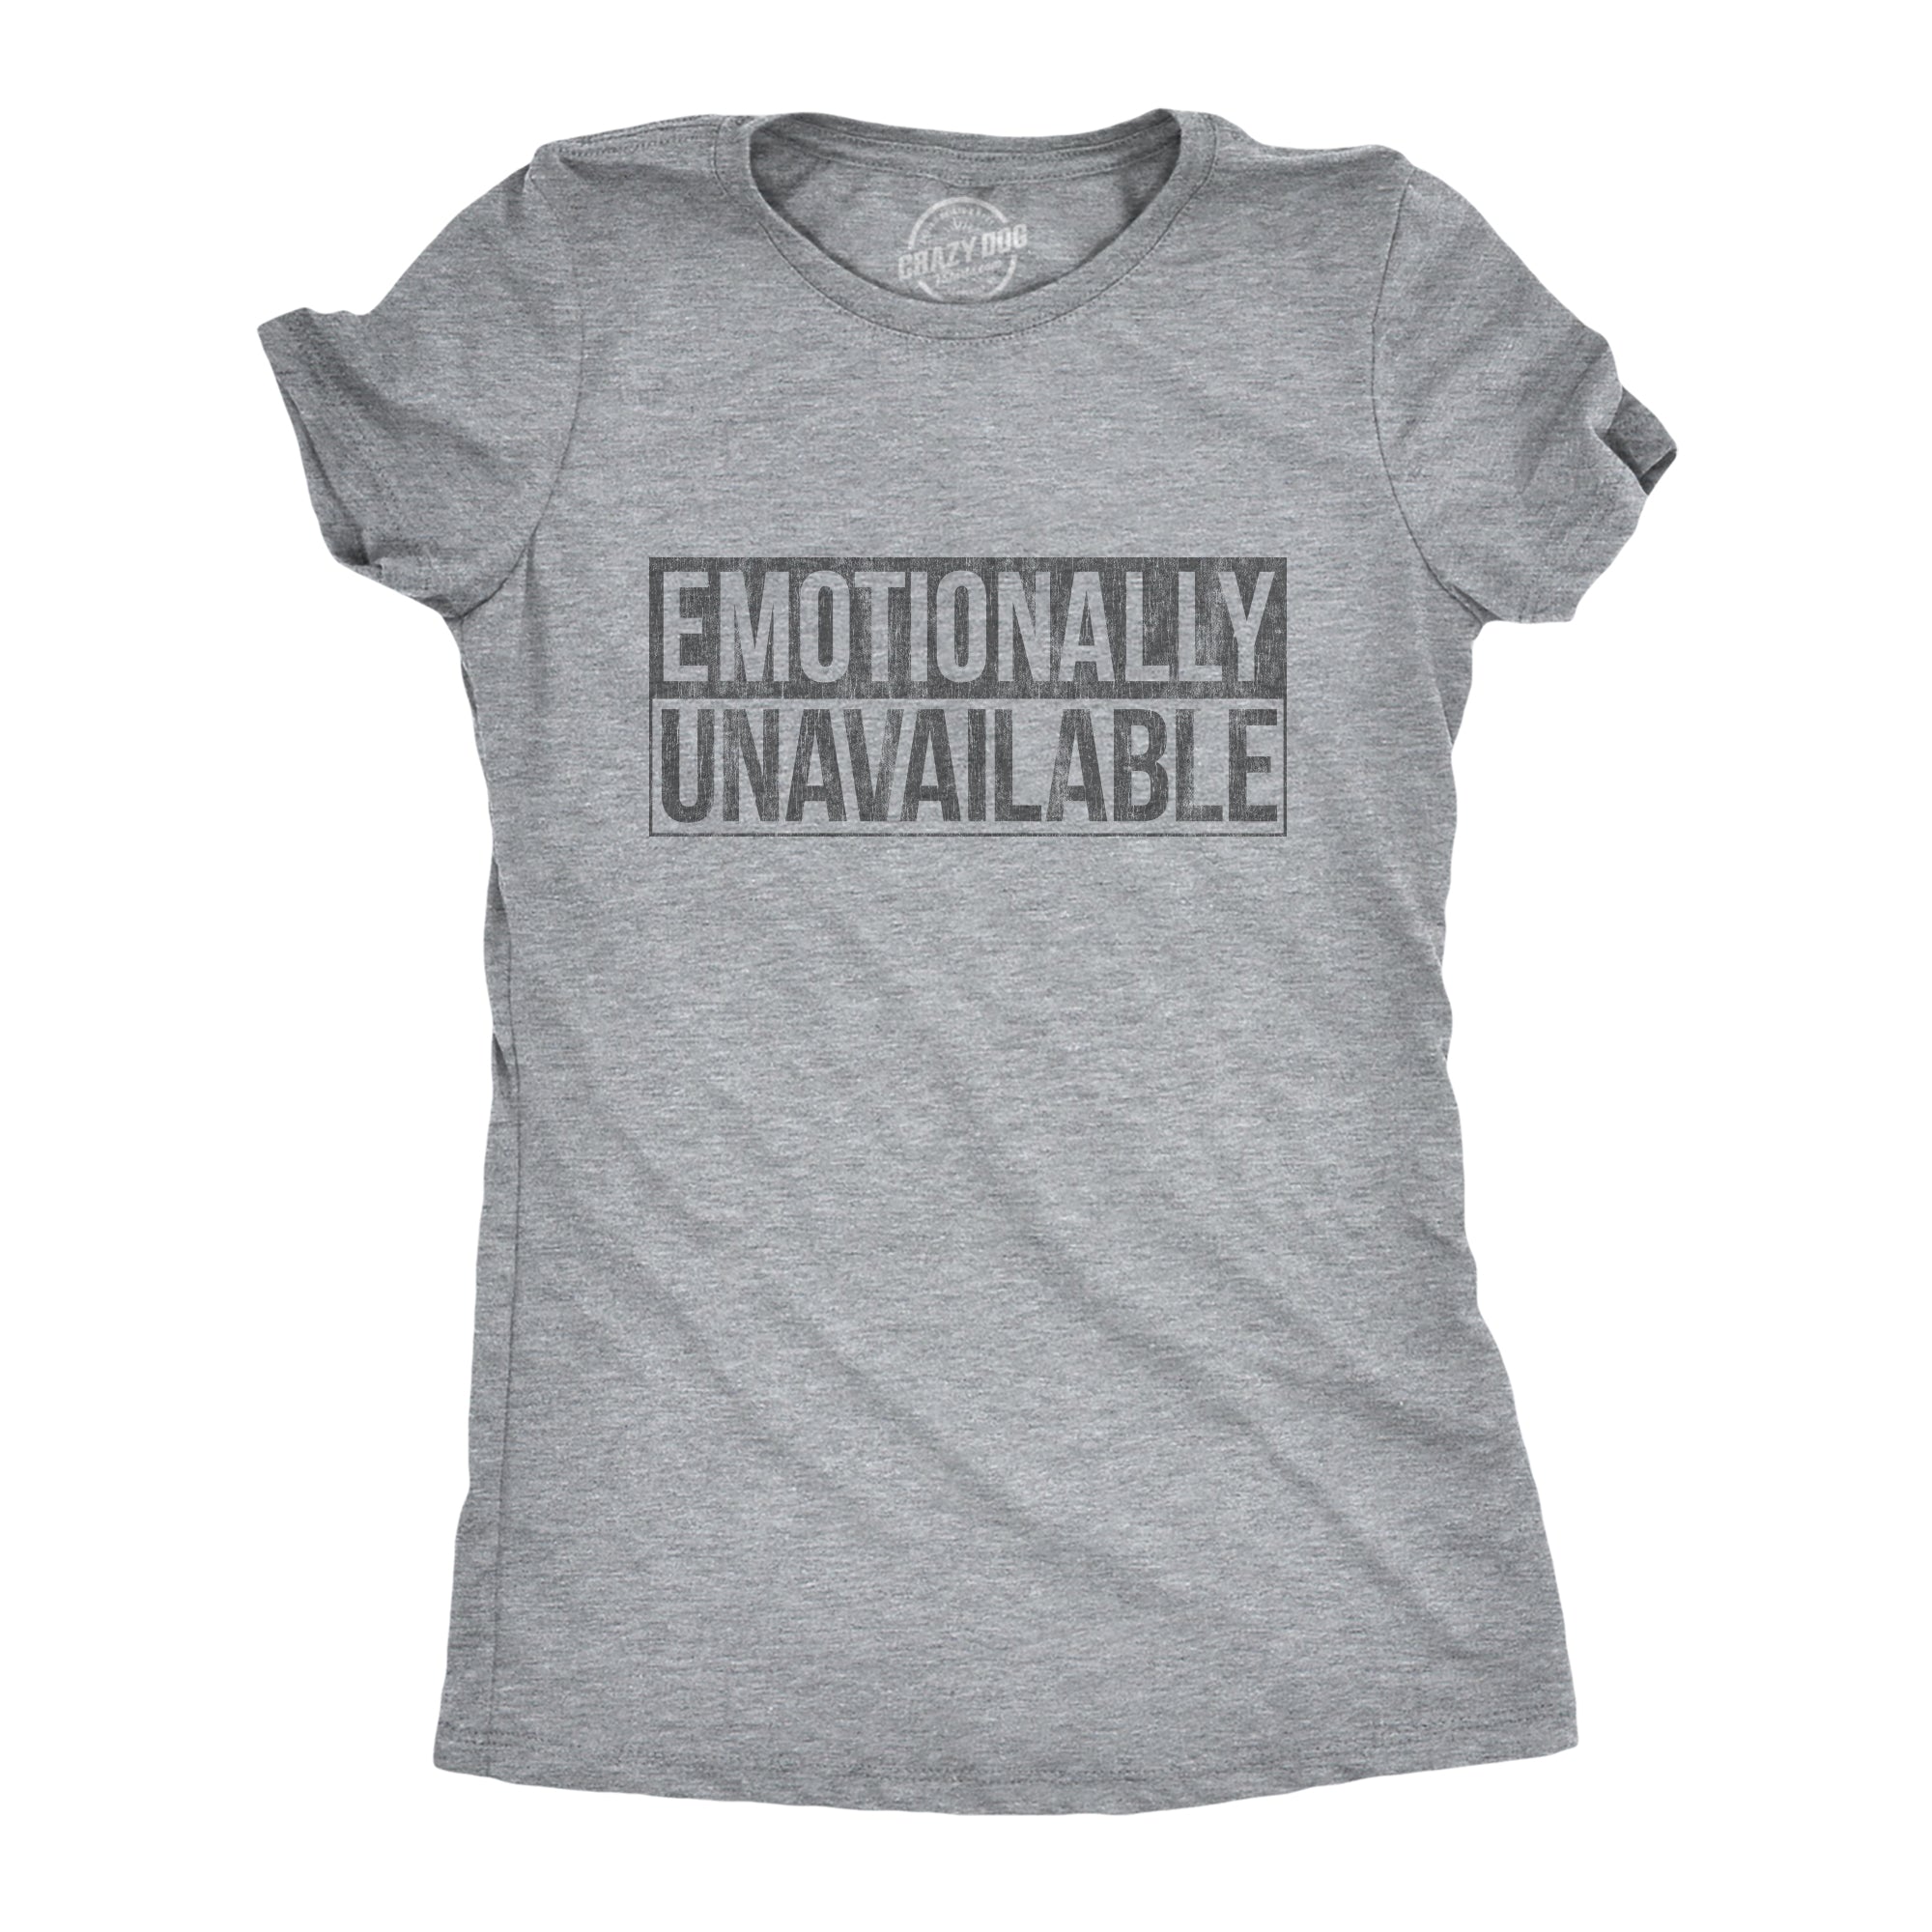 Funny Light Heather Grey Emotionally Unavailable Womens T Shirt Nerdy Valentine's Day Introvert Nerdy Tee